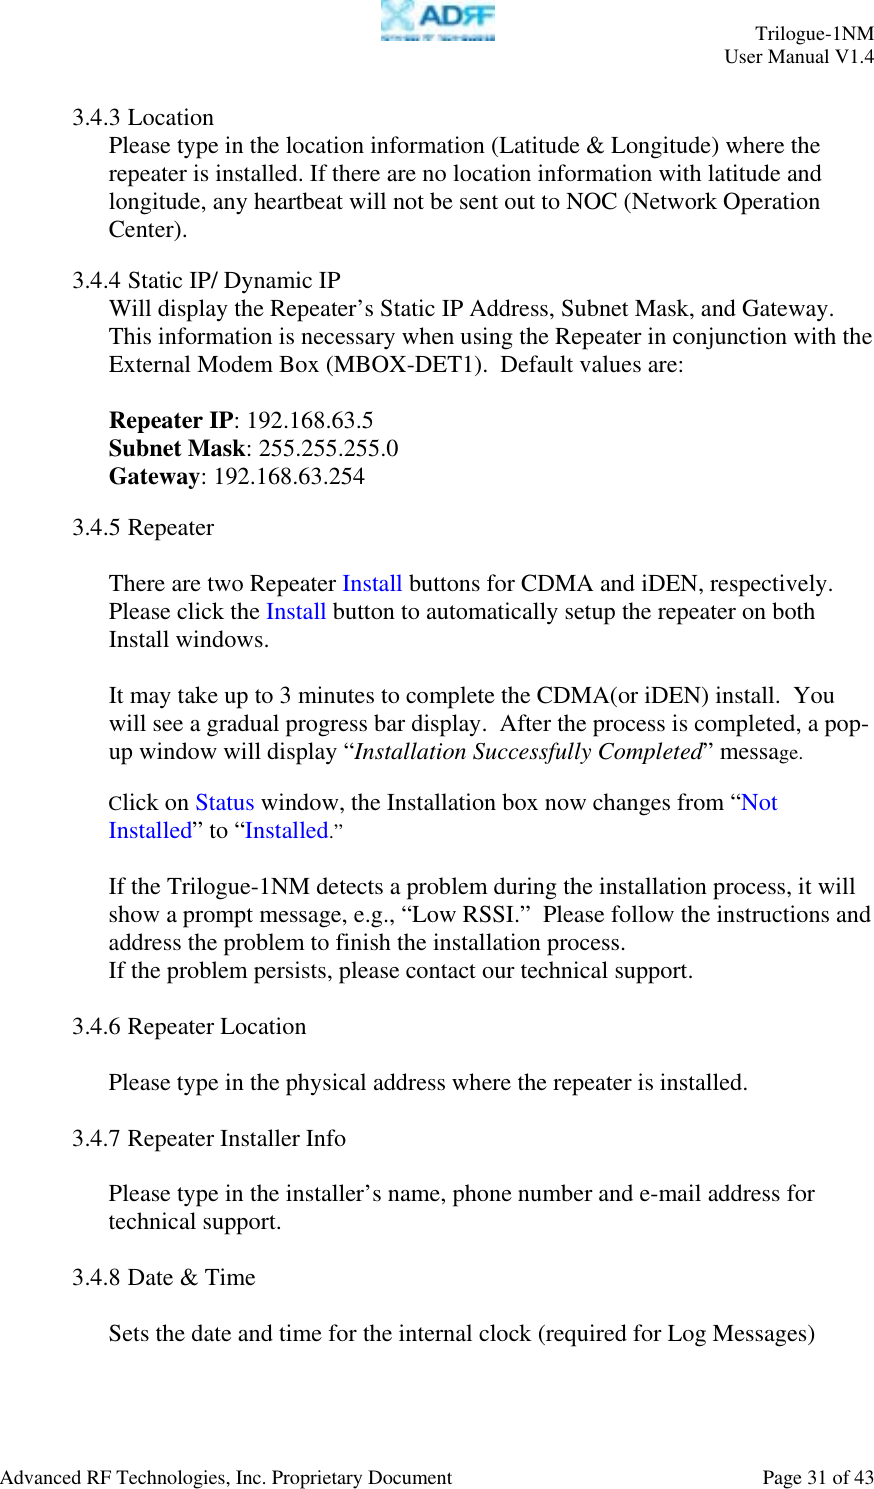     Trilogue-1NM User Manual V1.4  Advanced RF Technologies, Inc. Proprietary Document  Page 31 of 43  3.4.3 Location Please type in the location information (Latitude &amp; Longitude) where the repeater is installed. If there are no location information with latitude and longitude, any heartbeat will not be sent out to NOC (Network Operation Center).  3.4.4 Static IP/ Dynamic IP Will display the Repeater’s Static IP Address, Subnet Mask, and Gateway.  This information is necessary when using the Repeater in conjunction with the External Modem Box (MBOX-DET1).  Default values are:  Repeater IP: 192.168.63.5 Subnet Mask: 255.255.255.0 Gateway: 192.168.63.254  3.4.5 Repeater  There are two Repeater Install buttons for CDMA and iDEN, respectively. Please click the Install button to automatically setup the repeater on both Install windows.  It may take up to 3 minutes to complete the CDMA(or iDEN) install.  You will see a gradual progress bar display.  After the process is completed, a pop-up window will display “Installation Successfully Completed” message.    Click on Status window, the Installation box now changes from “Not Installed” to “Installed.”   If the Trilogue-1NM detects a problem during the installation process, it will show a prompt message, e.g., “Low RSSI.”  Please follow the instructions and address the problem to finish the installation process. If the problem persists, please contact our technical support.  3.4.6 Repeater Location  Please type in the physical address where the repeater is installed.  3.4.7 Repeater Installer Info  Please type in the installer’s name, phone number and e-mail address for technical support.  3.4.8 Date &amp; Time  Sets the date and time for the internal clock (required for Log Messages)  